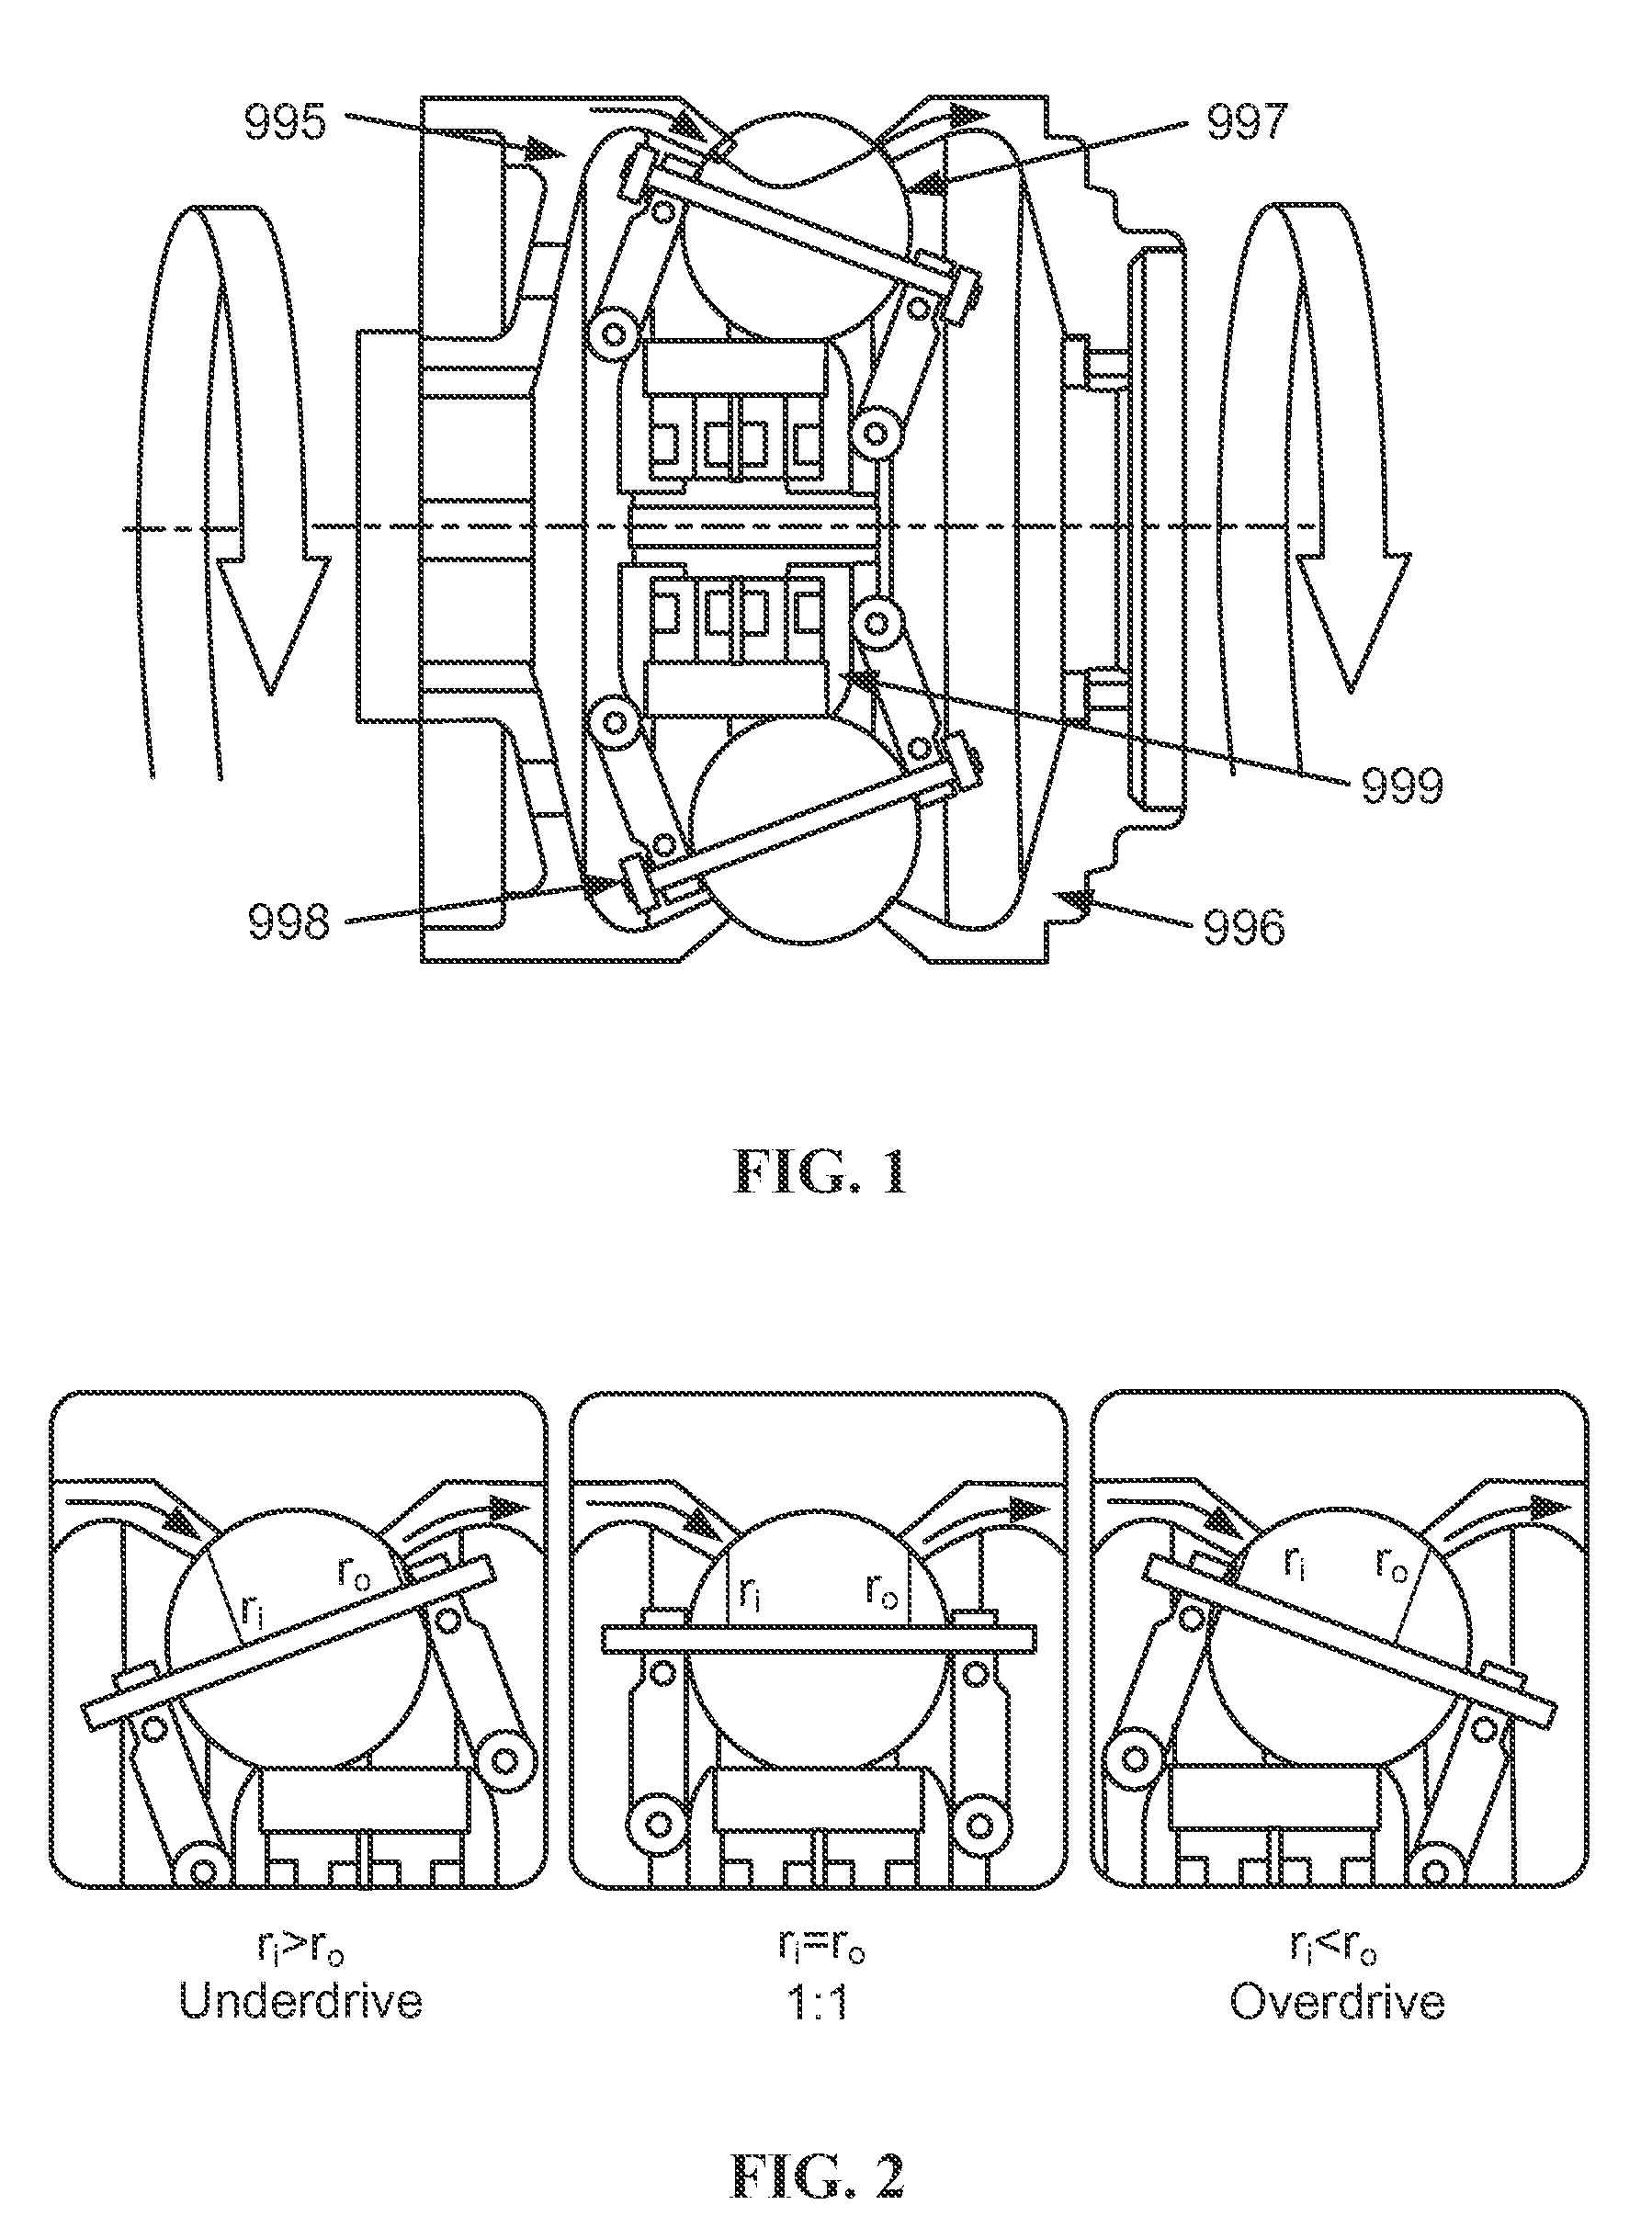 Ball type continuously variable transmission